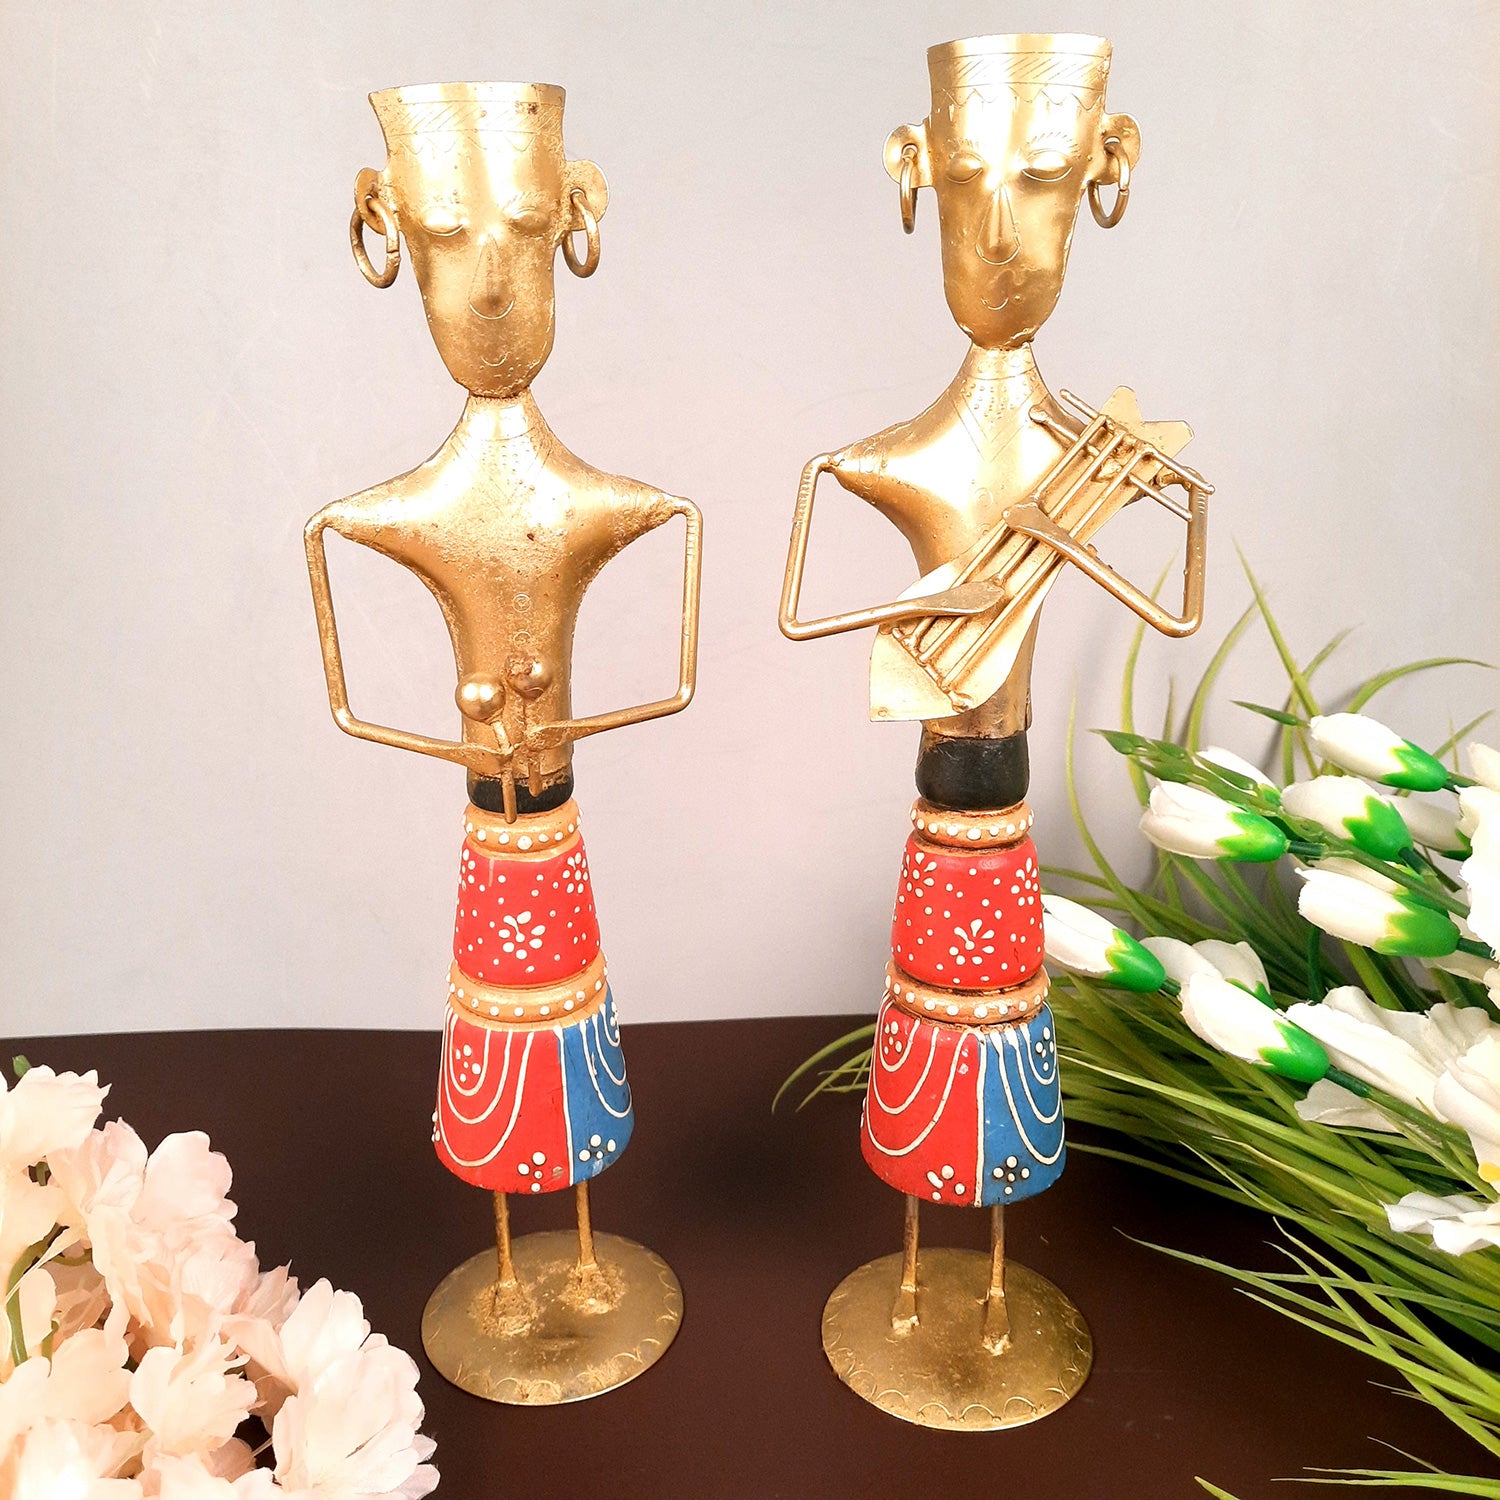 Showpiece Musician Set | Tribal Musician Figurine - For Home, Table, Living Room & TV Unit Decor | Show Piece For Office Desk & Gifts - 12 Inch (Set of 2)